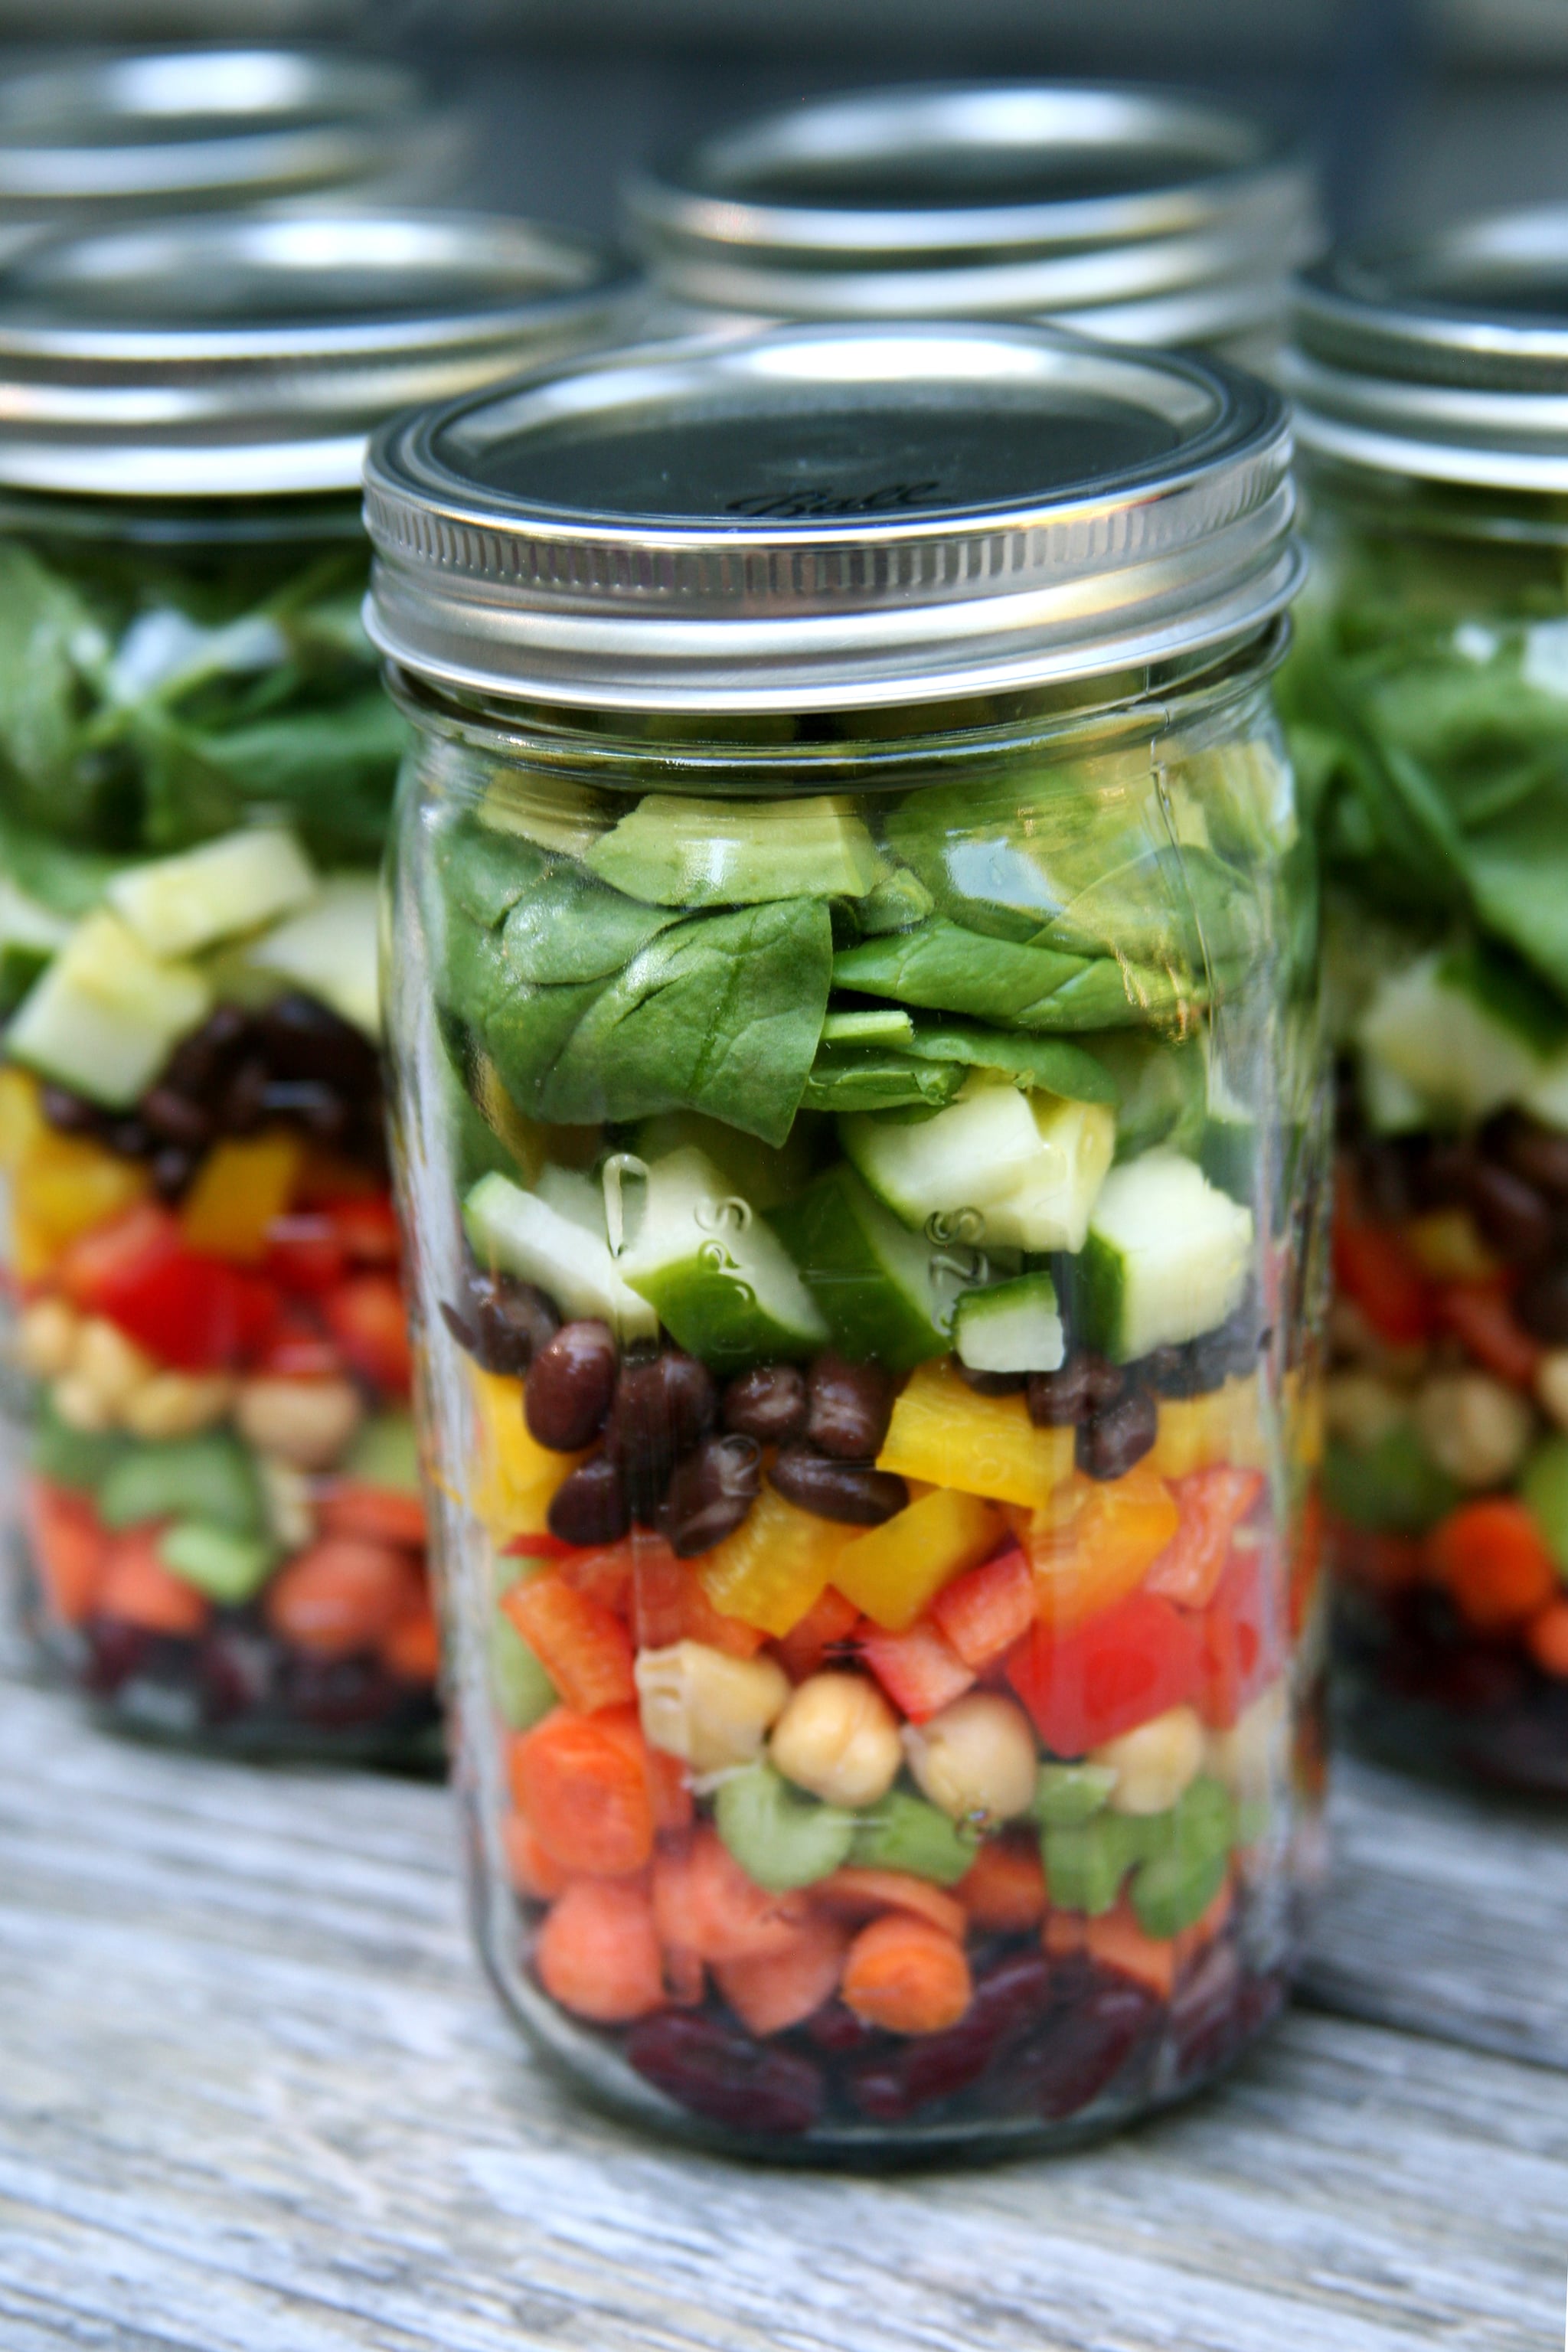 What Size Jar For Salads